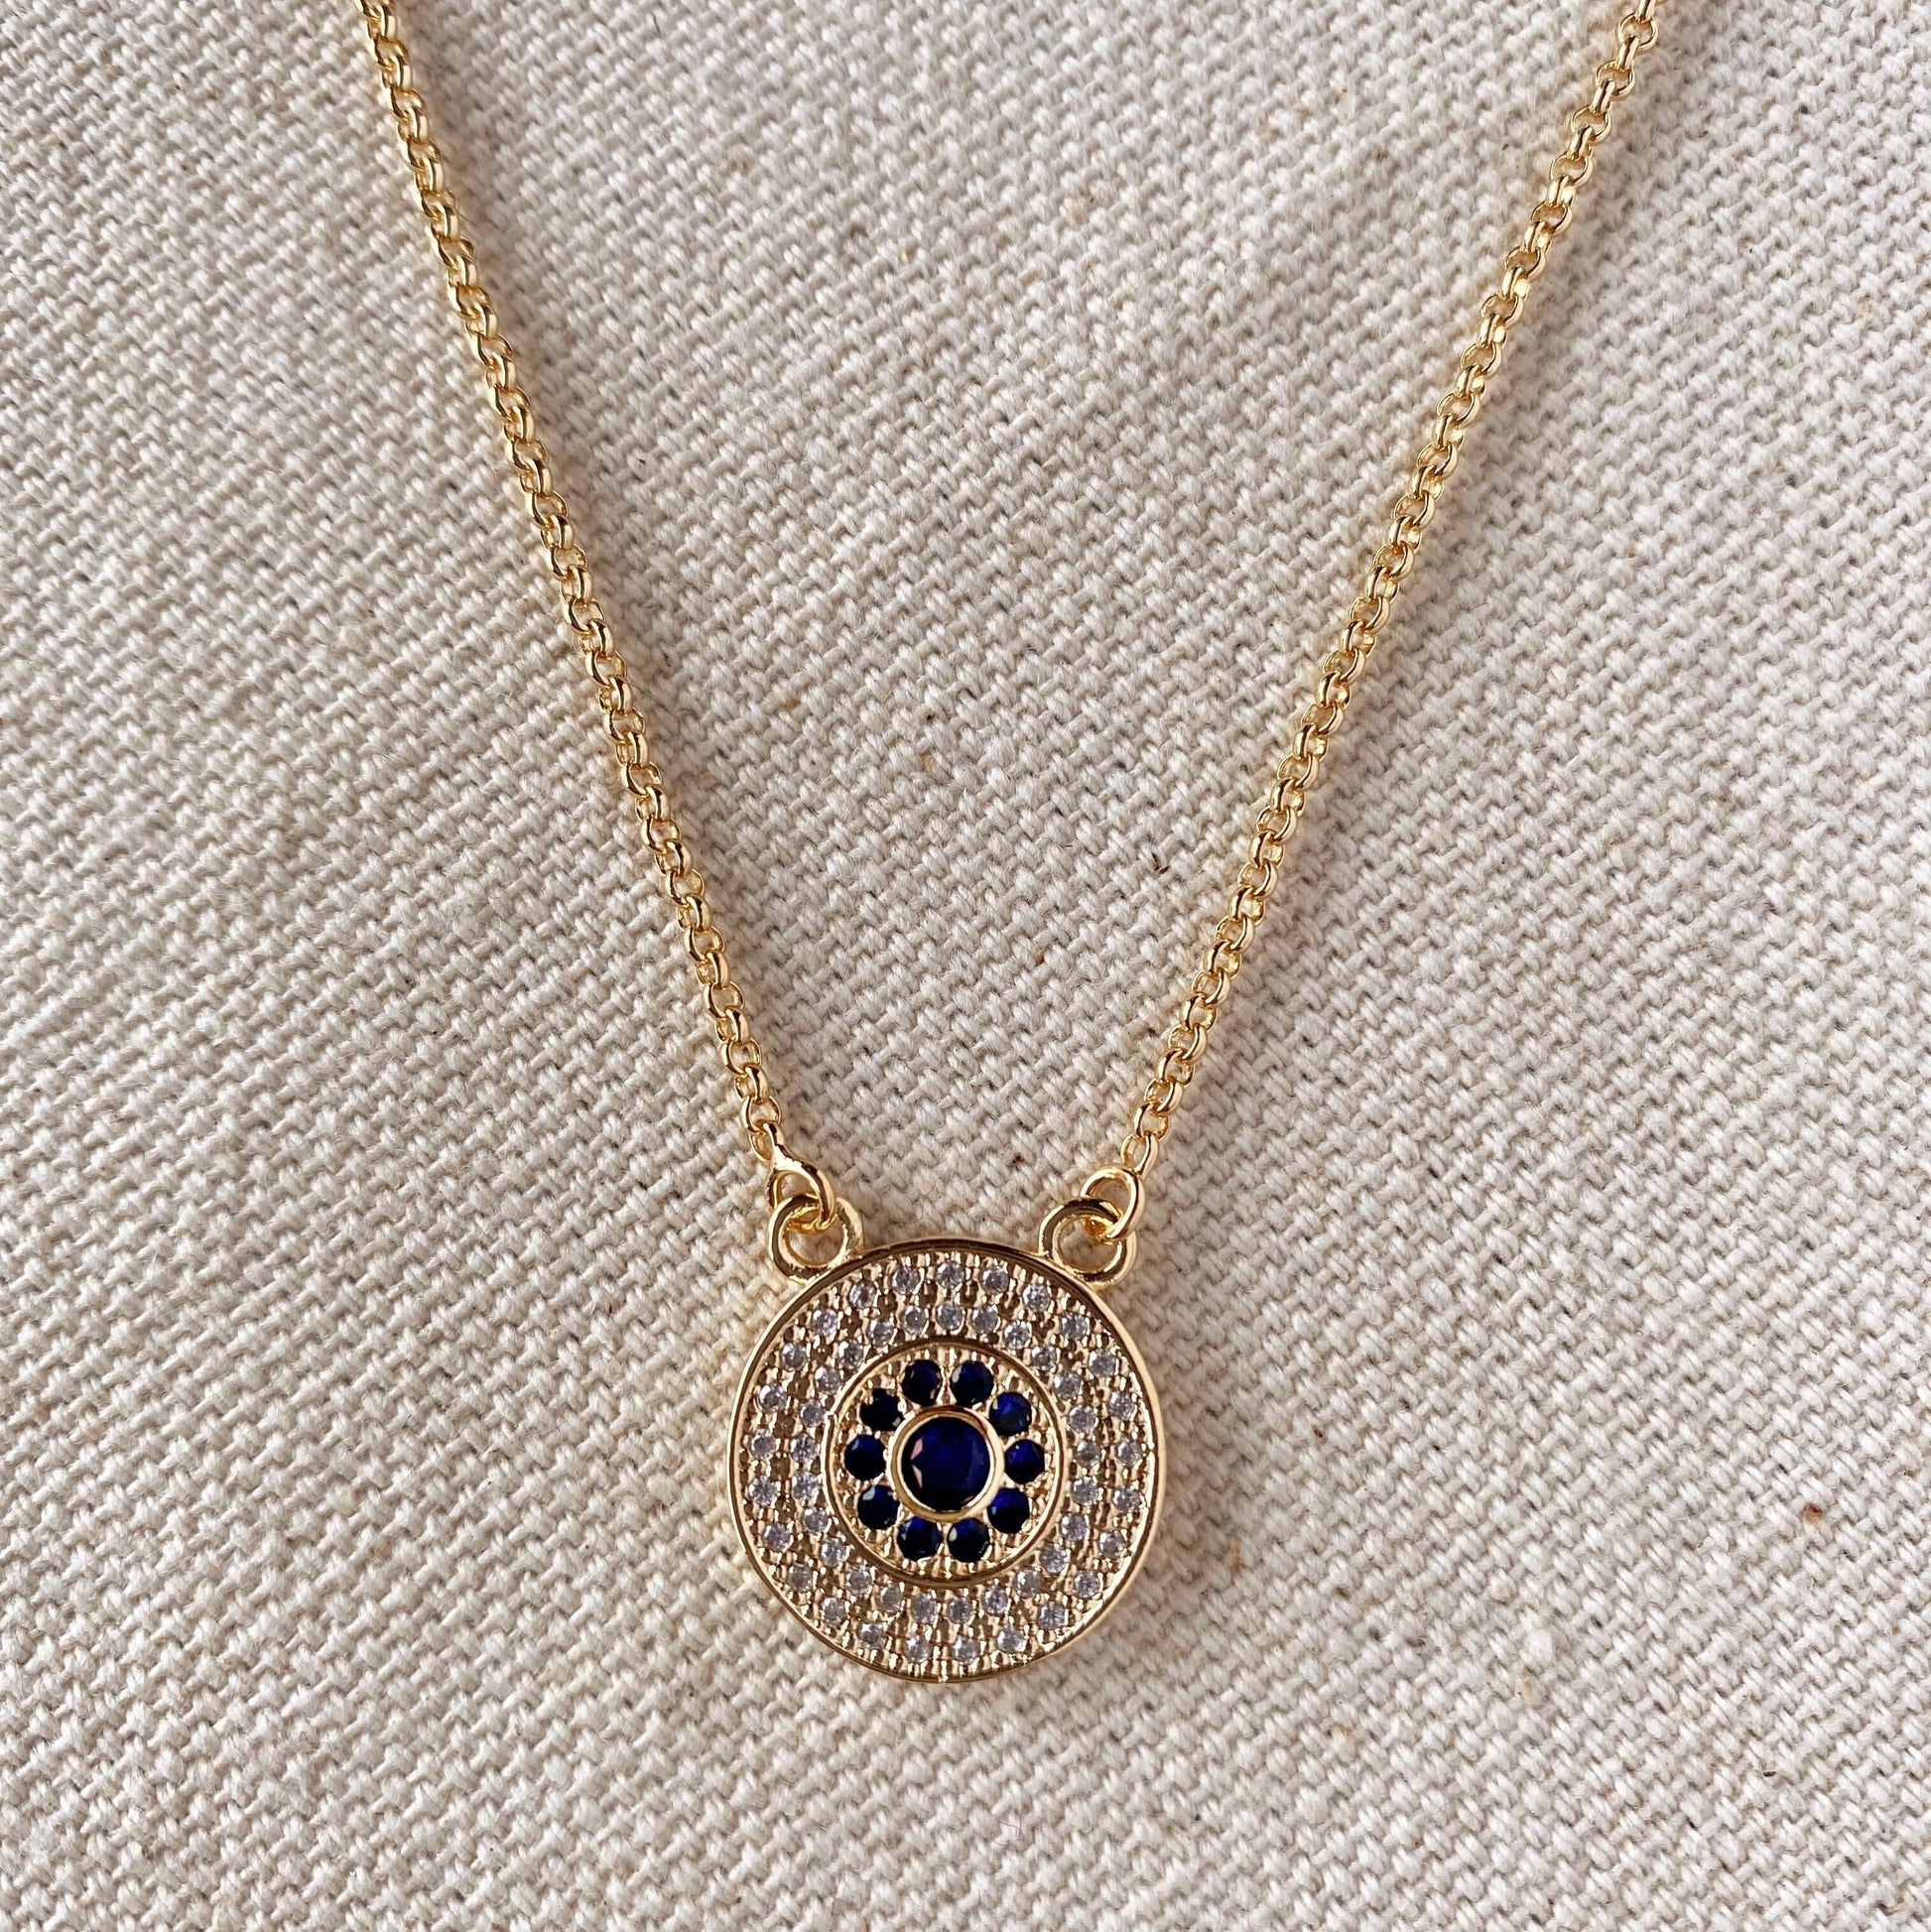 GoldFi 18k Gold Filled Round Evil Eye Necklace Featuring Detail In Cubic Zirconia